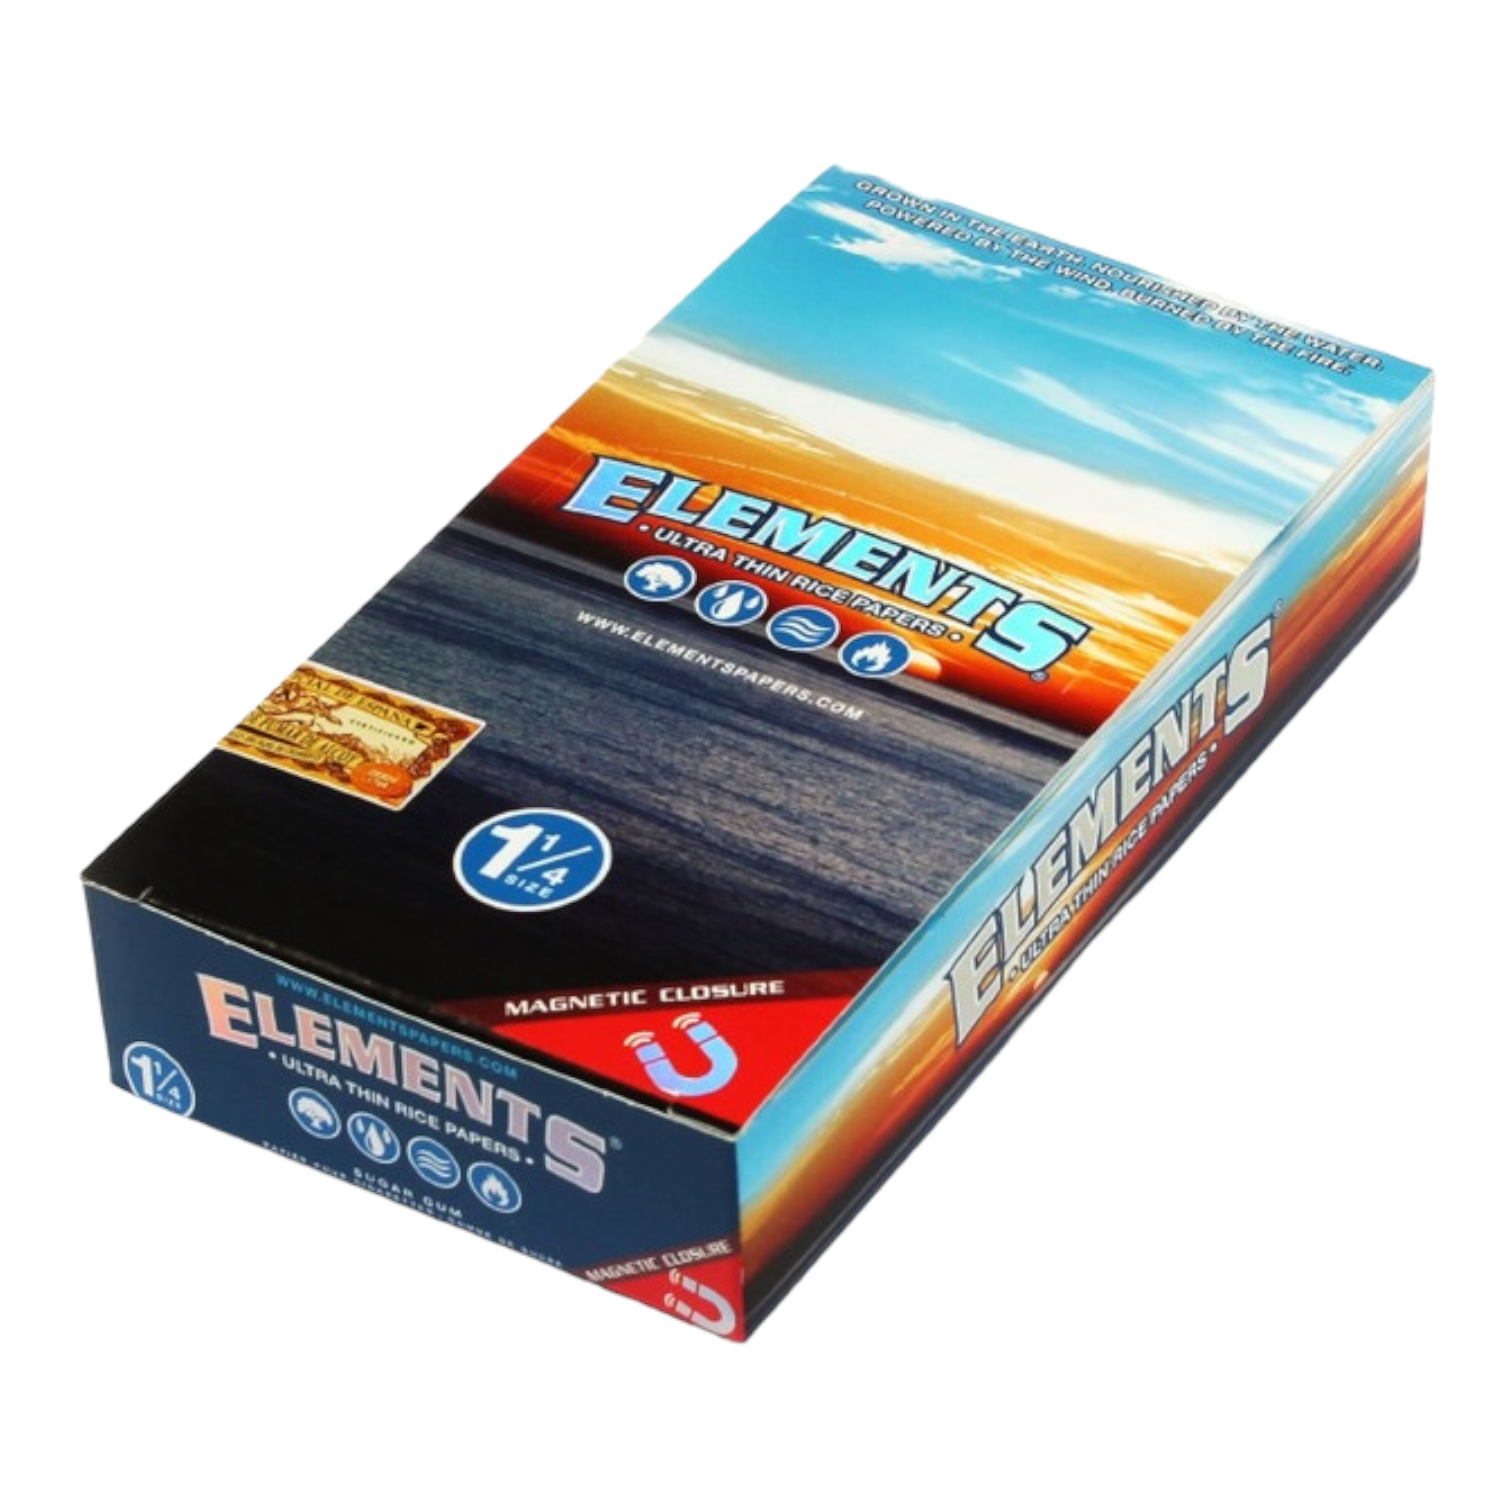 ELEMENTS 25 Pack 1 Box Elements 1 1/4 (1.25) Rolling Paper Ultra Thin Rice